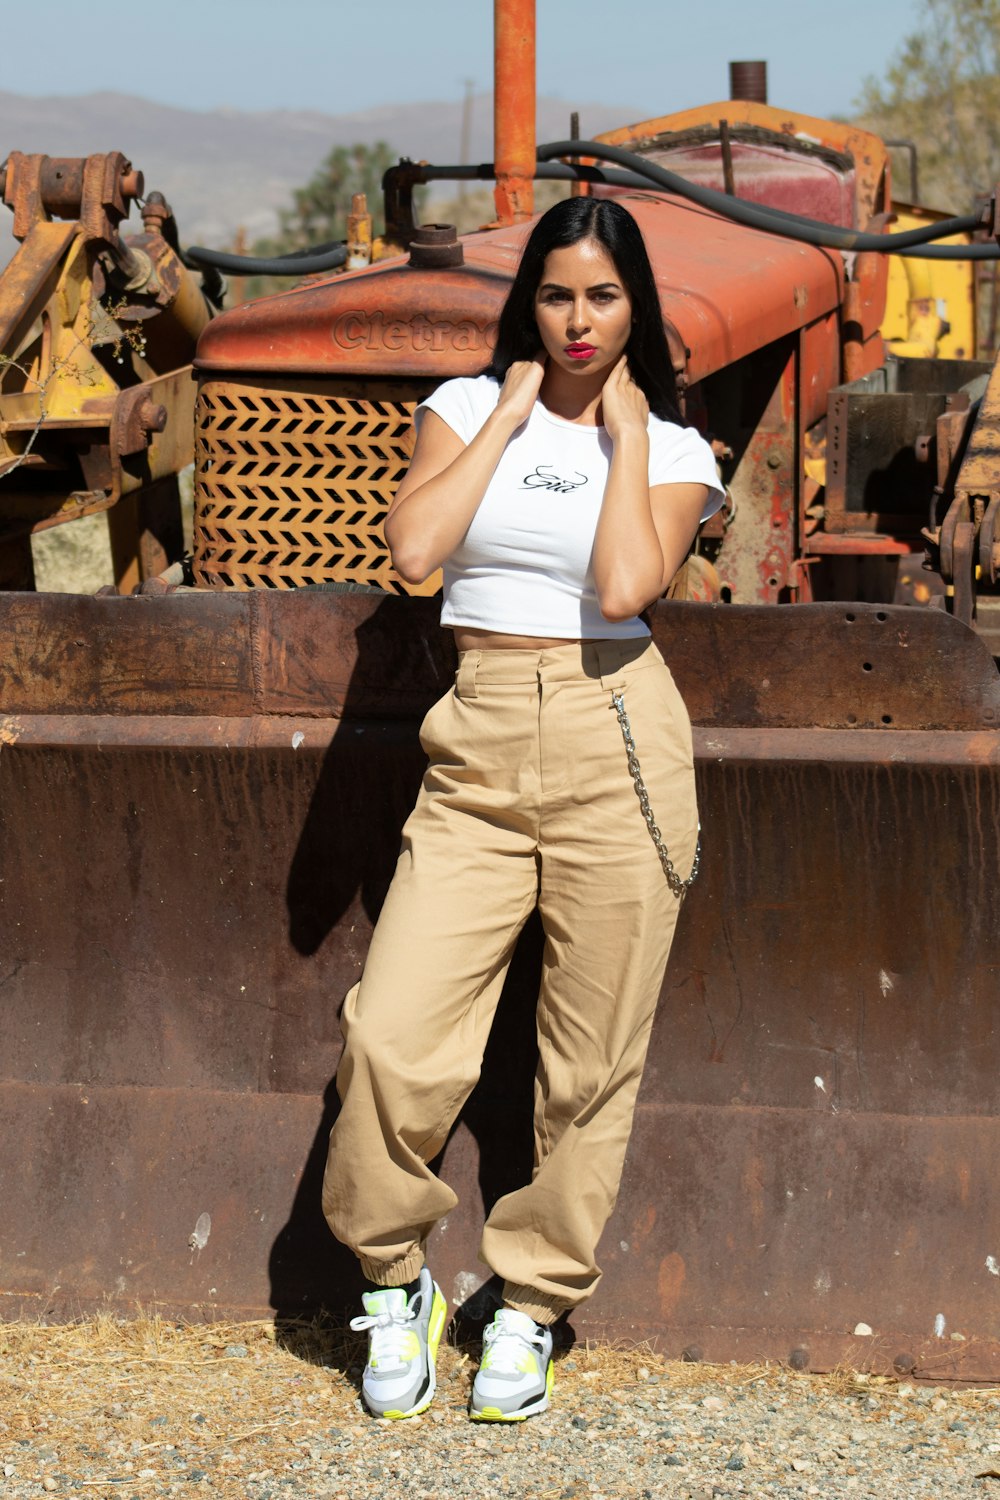 woman in white tank top and brown pants